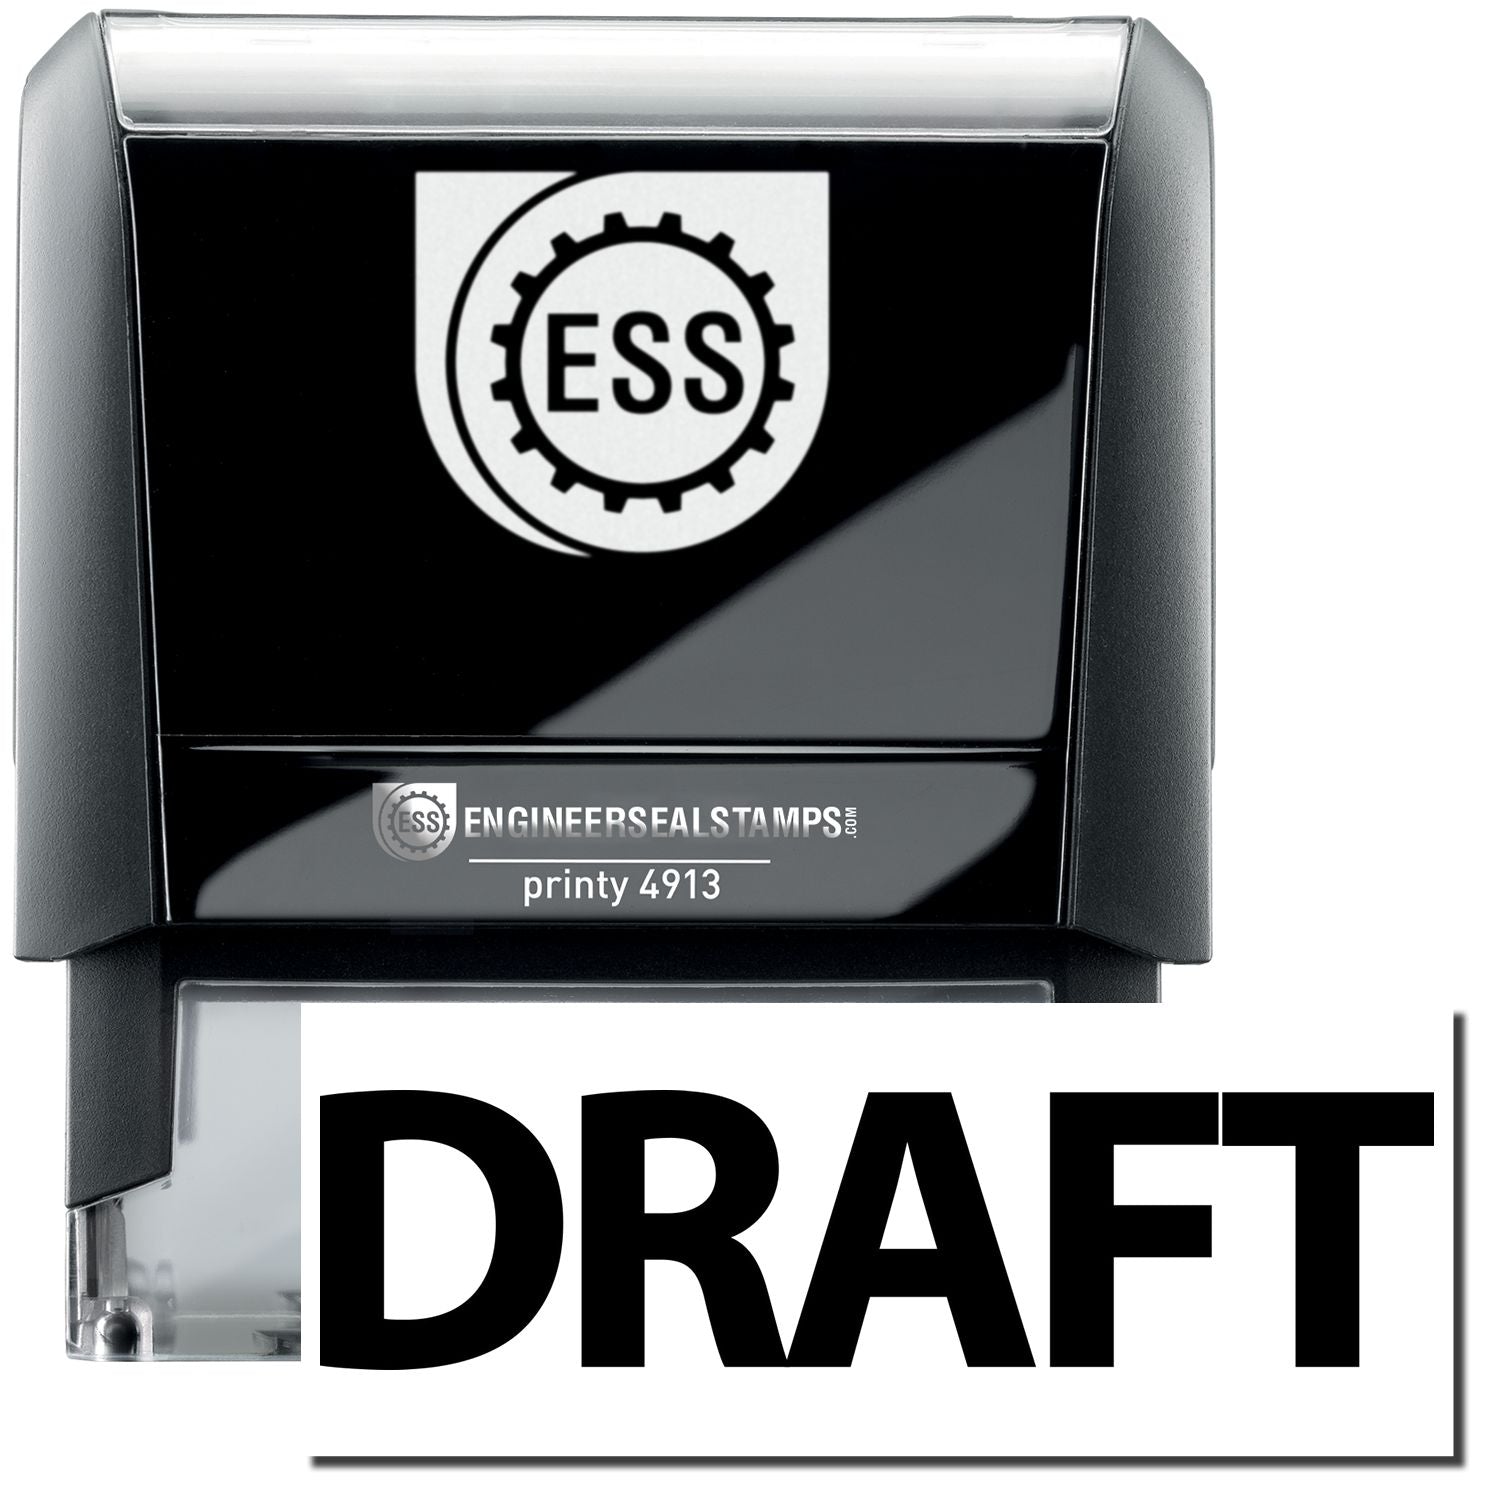 A self-inking stamp with a stamped image showing how the text "DRAFT" in a large bold font is displayed by it after stamping.